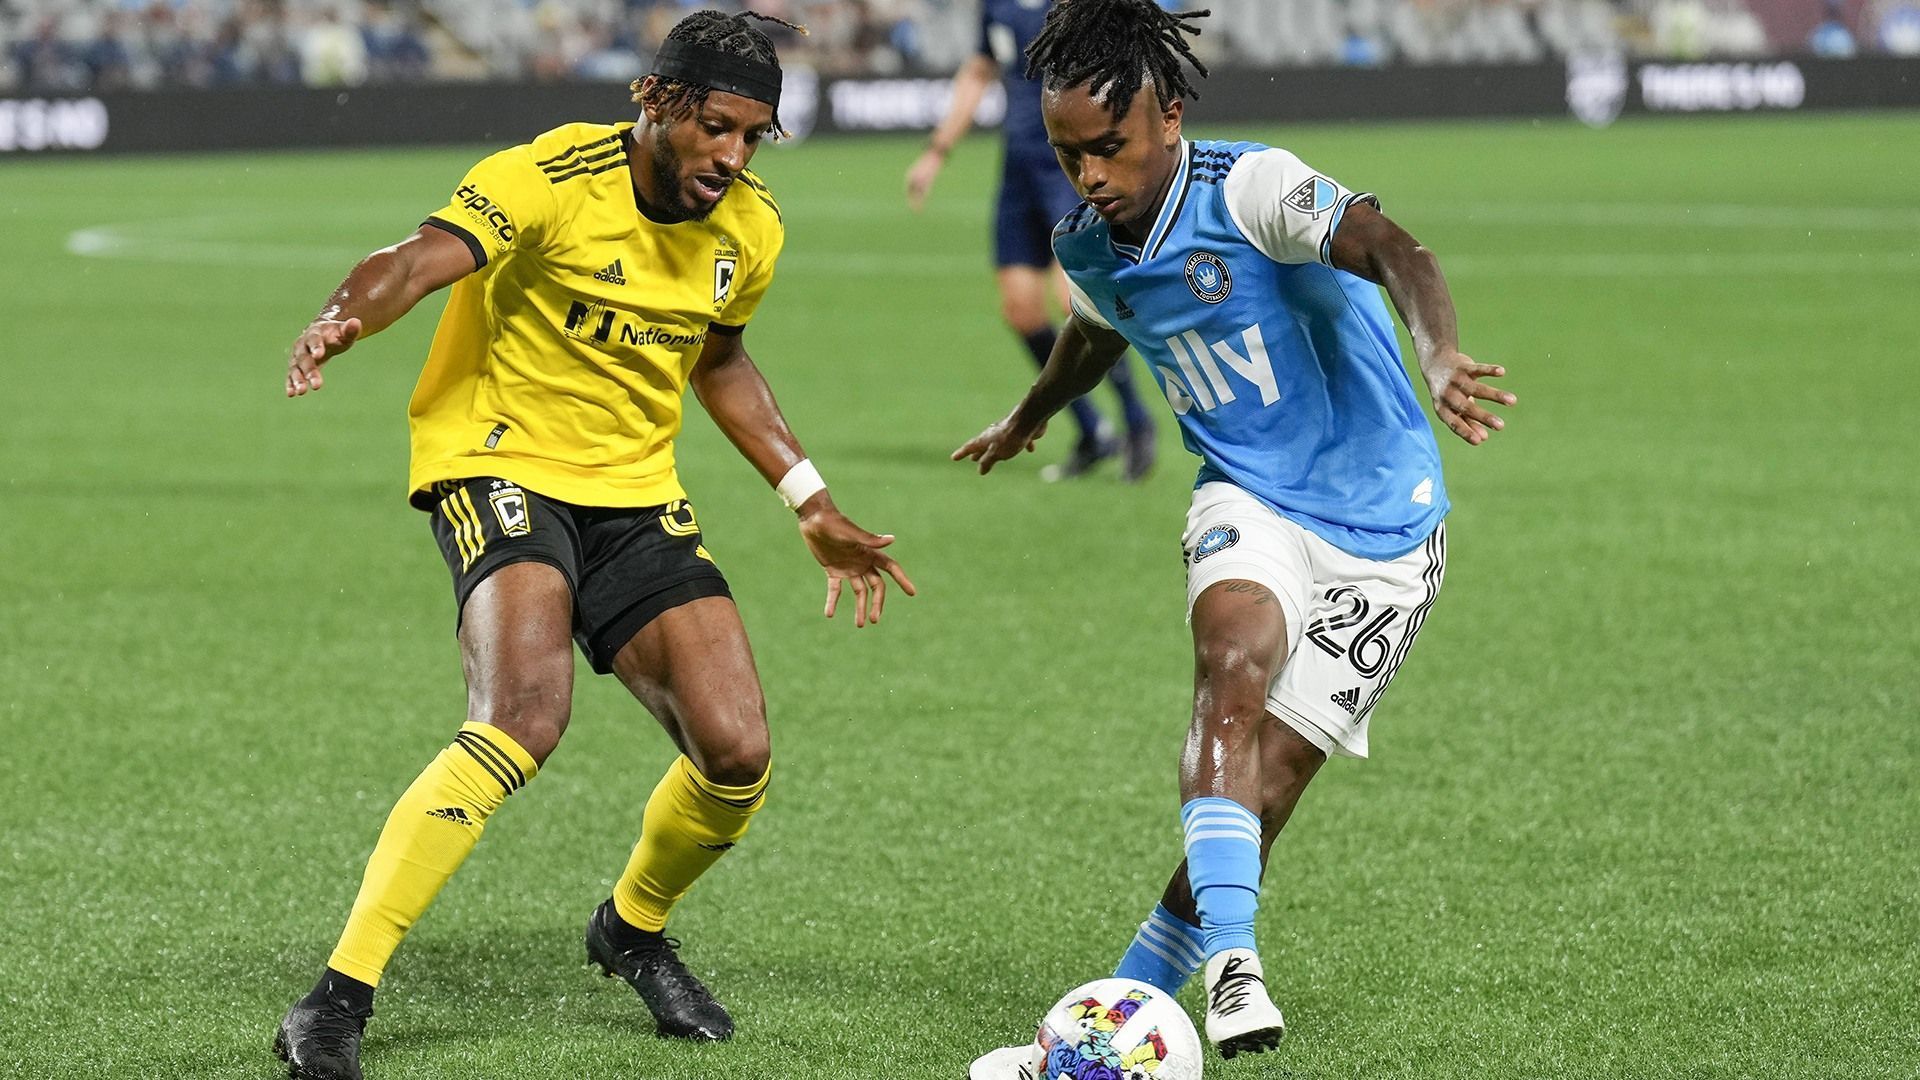 Charlotte and Columbus will meet for just the third time